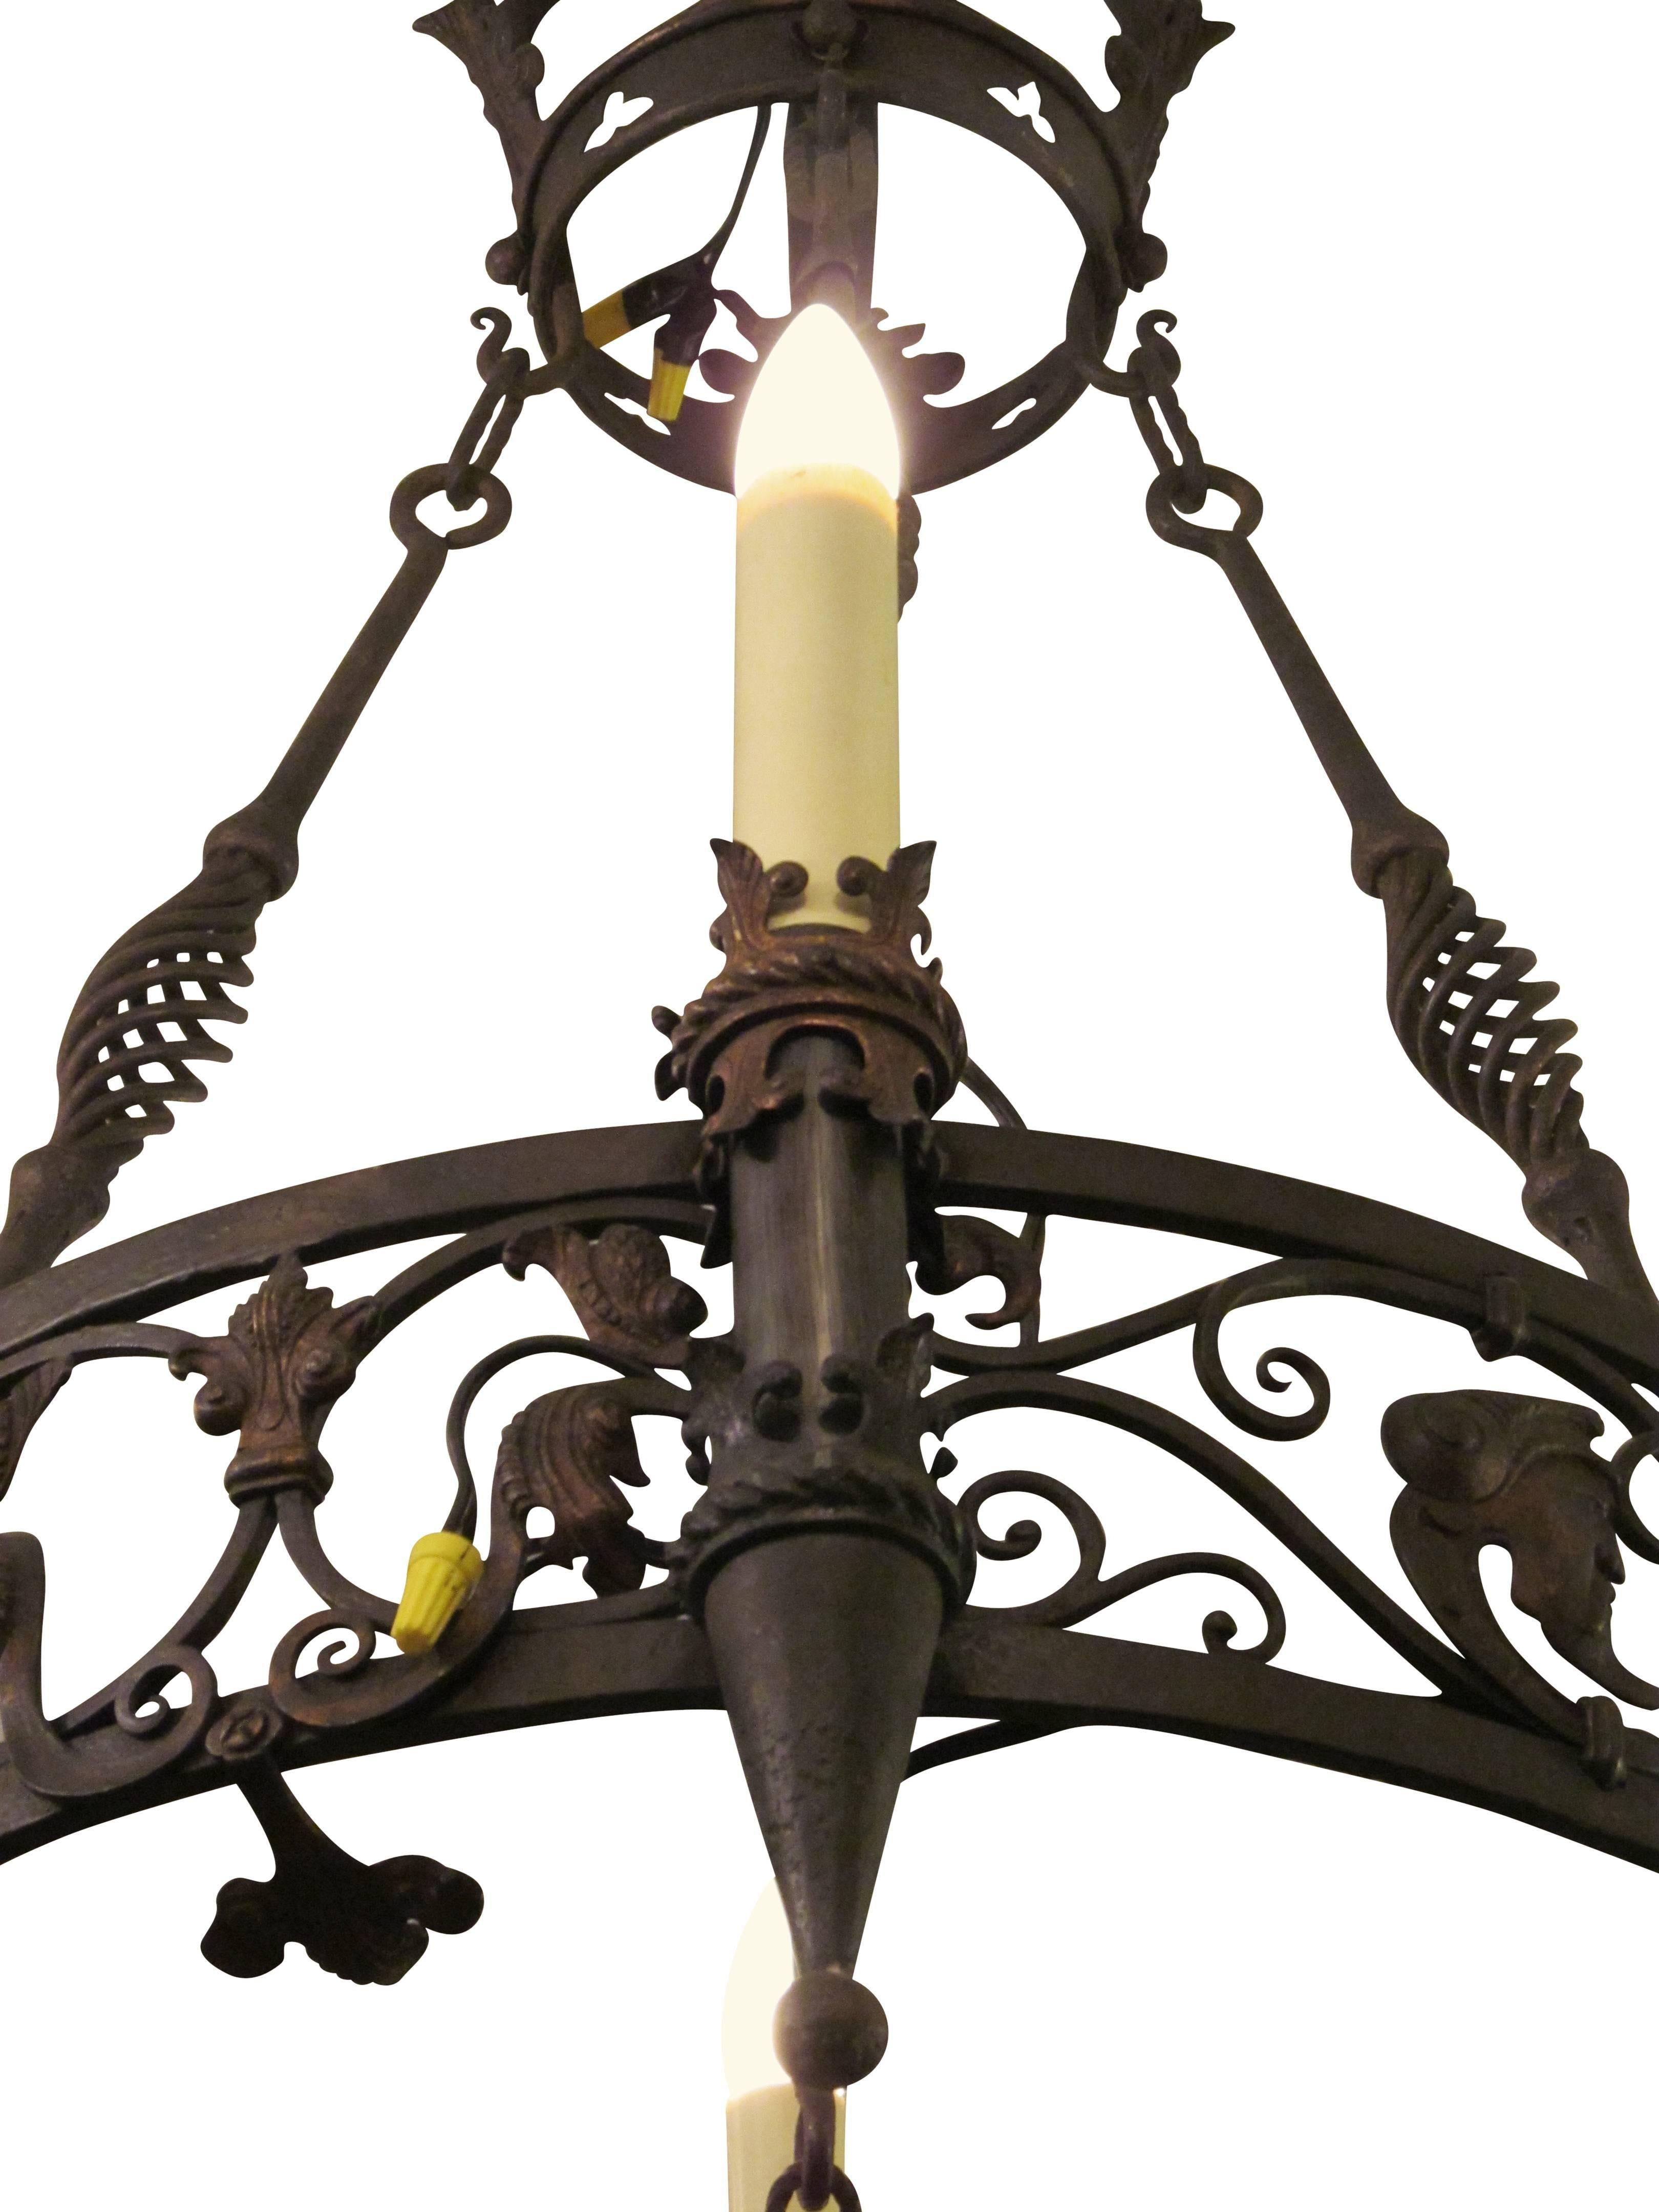 American 1920s Wrought Iron Four-Light Chandelier with Spirals and Hand Tooled Designs